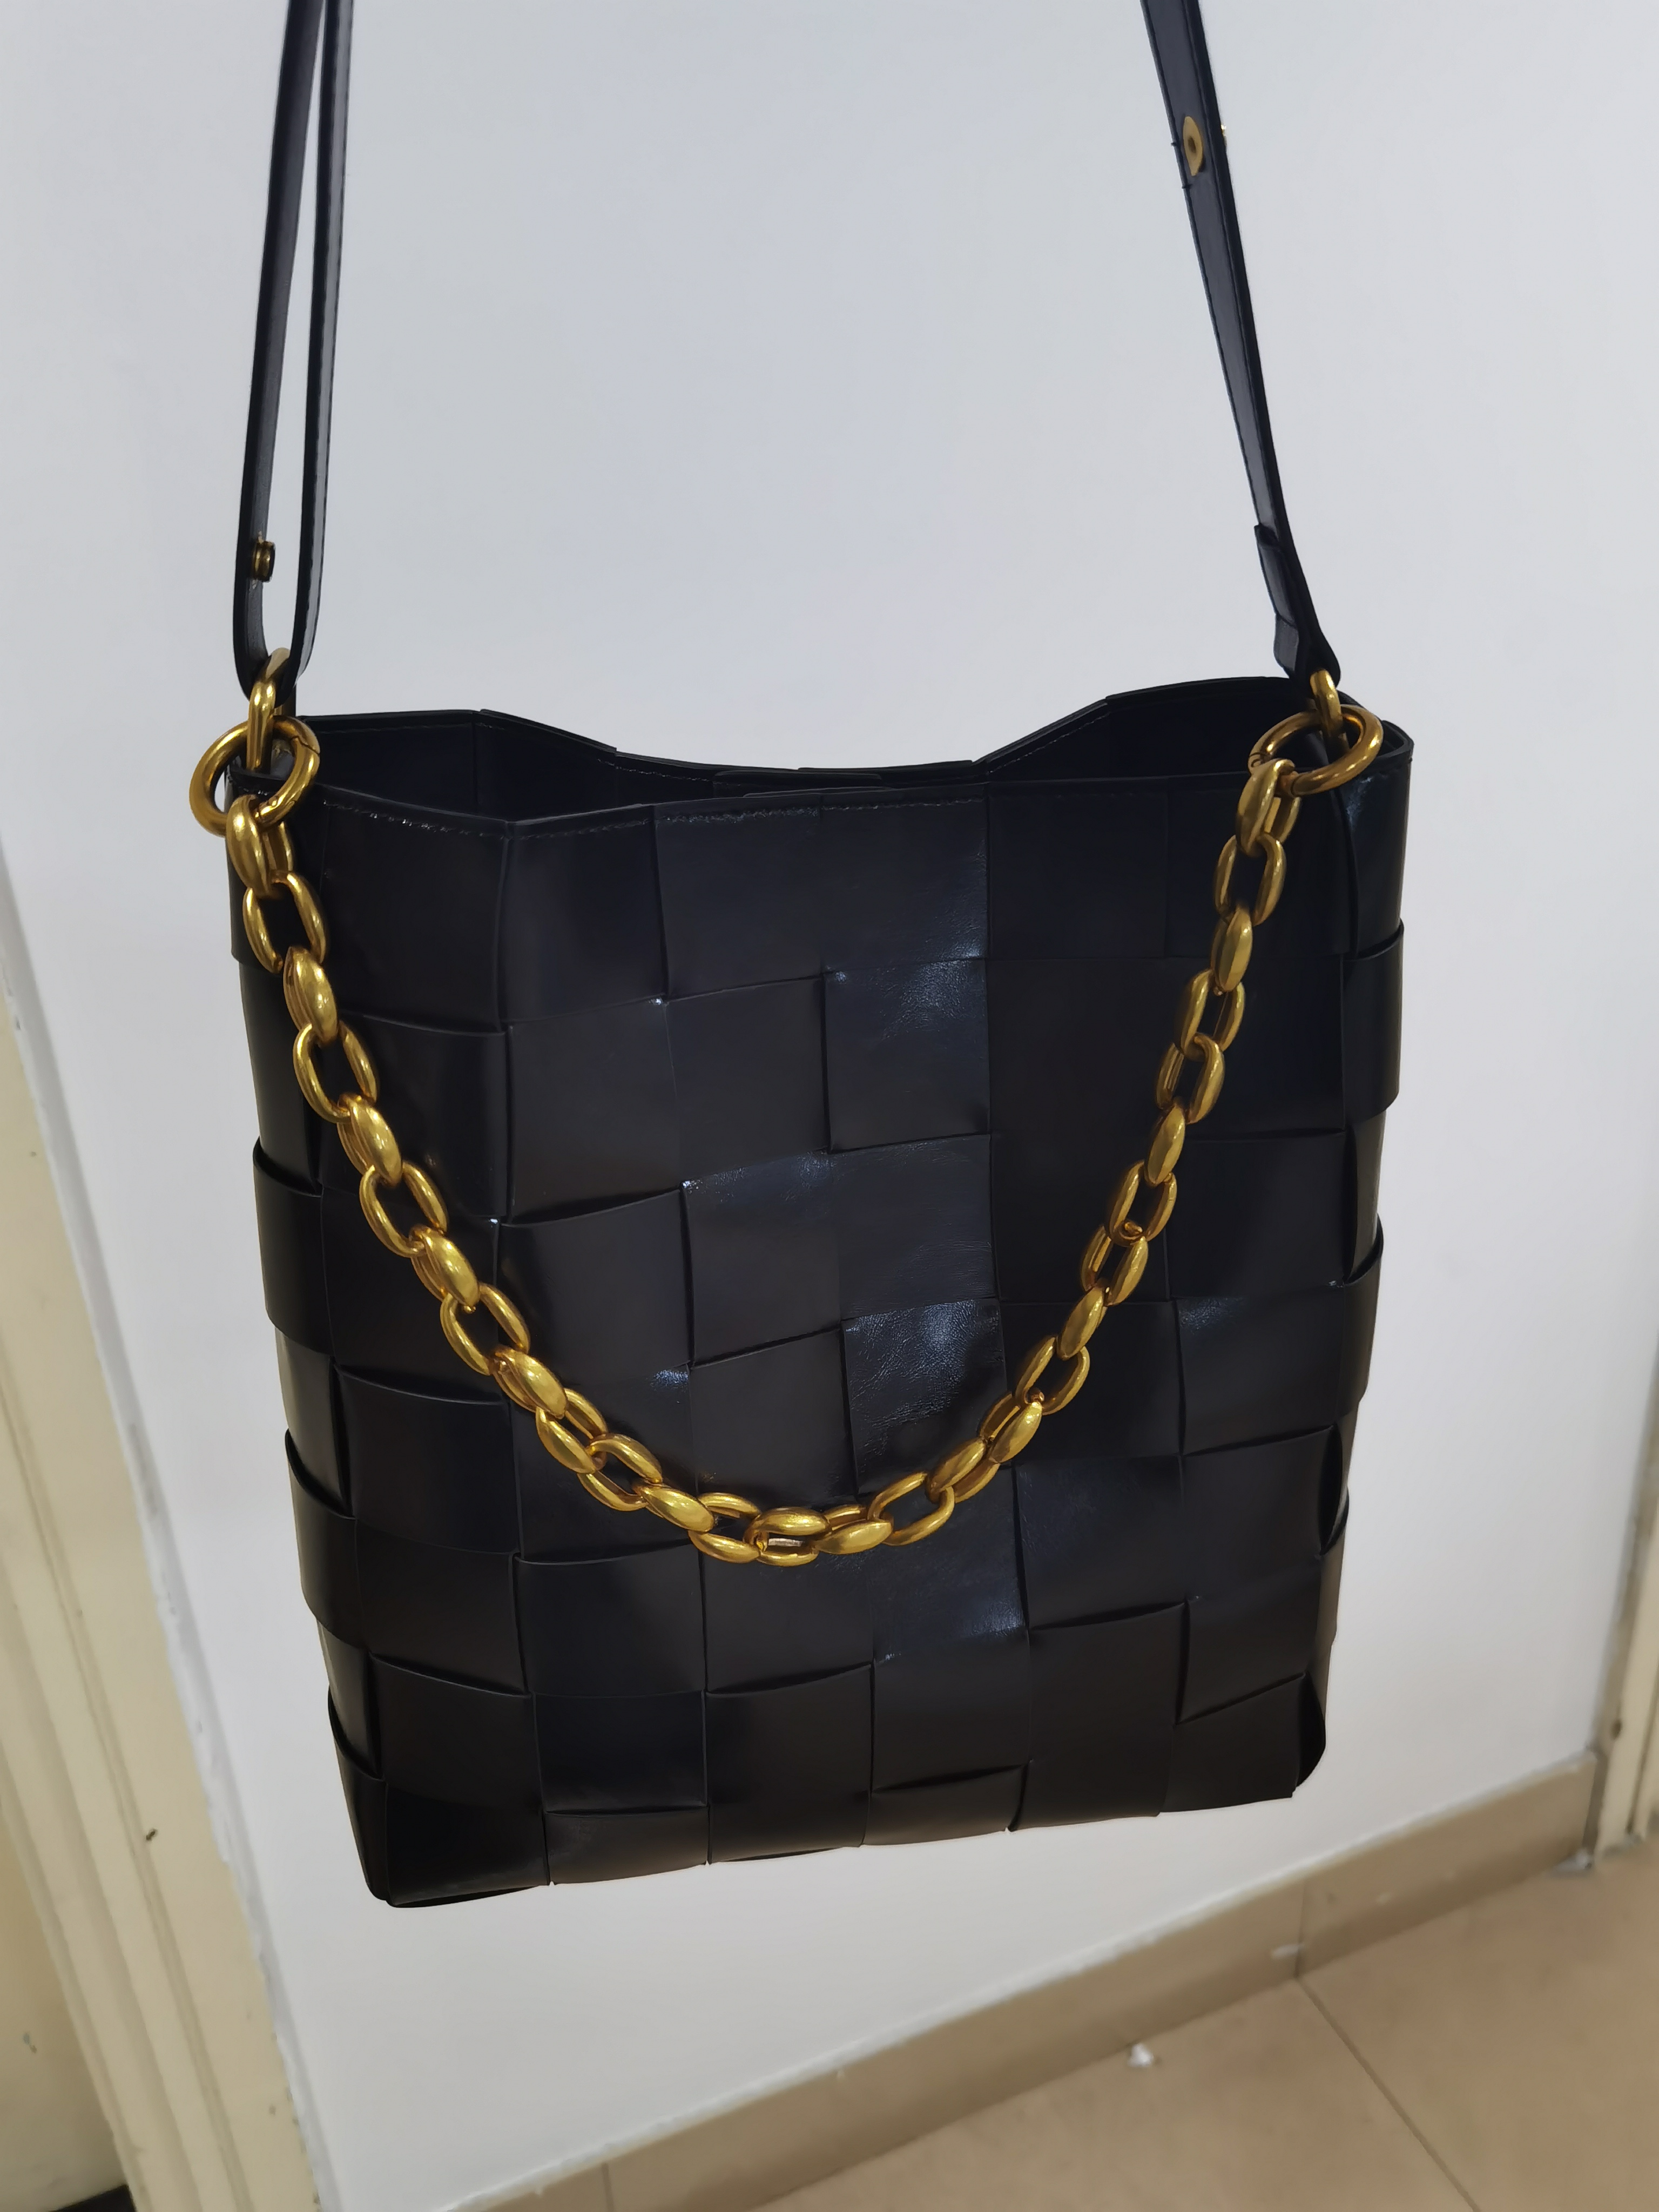 Women's Woven Tote Bags in Genuine Leather photo review